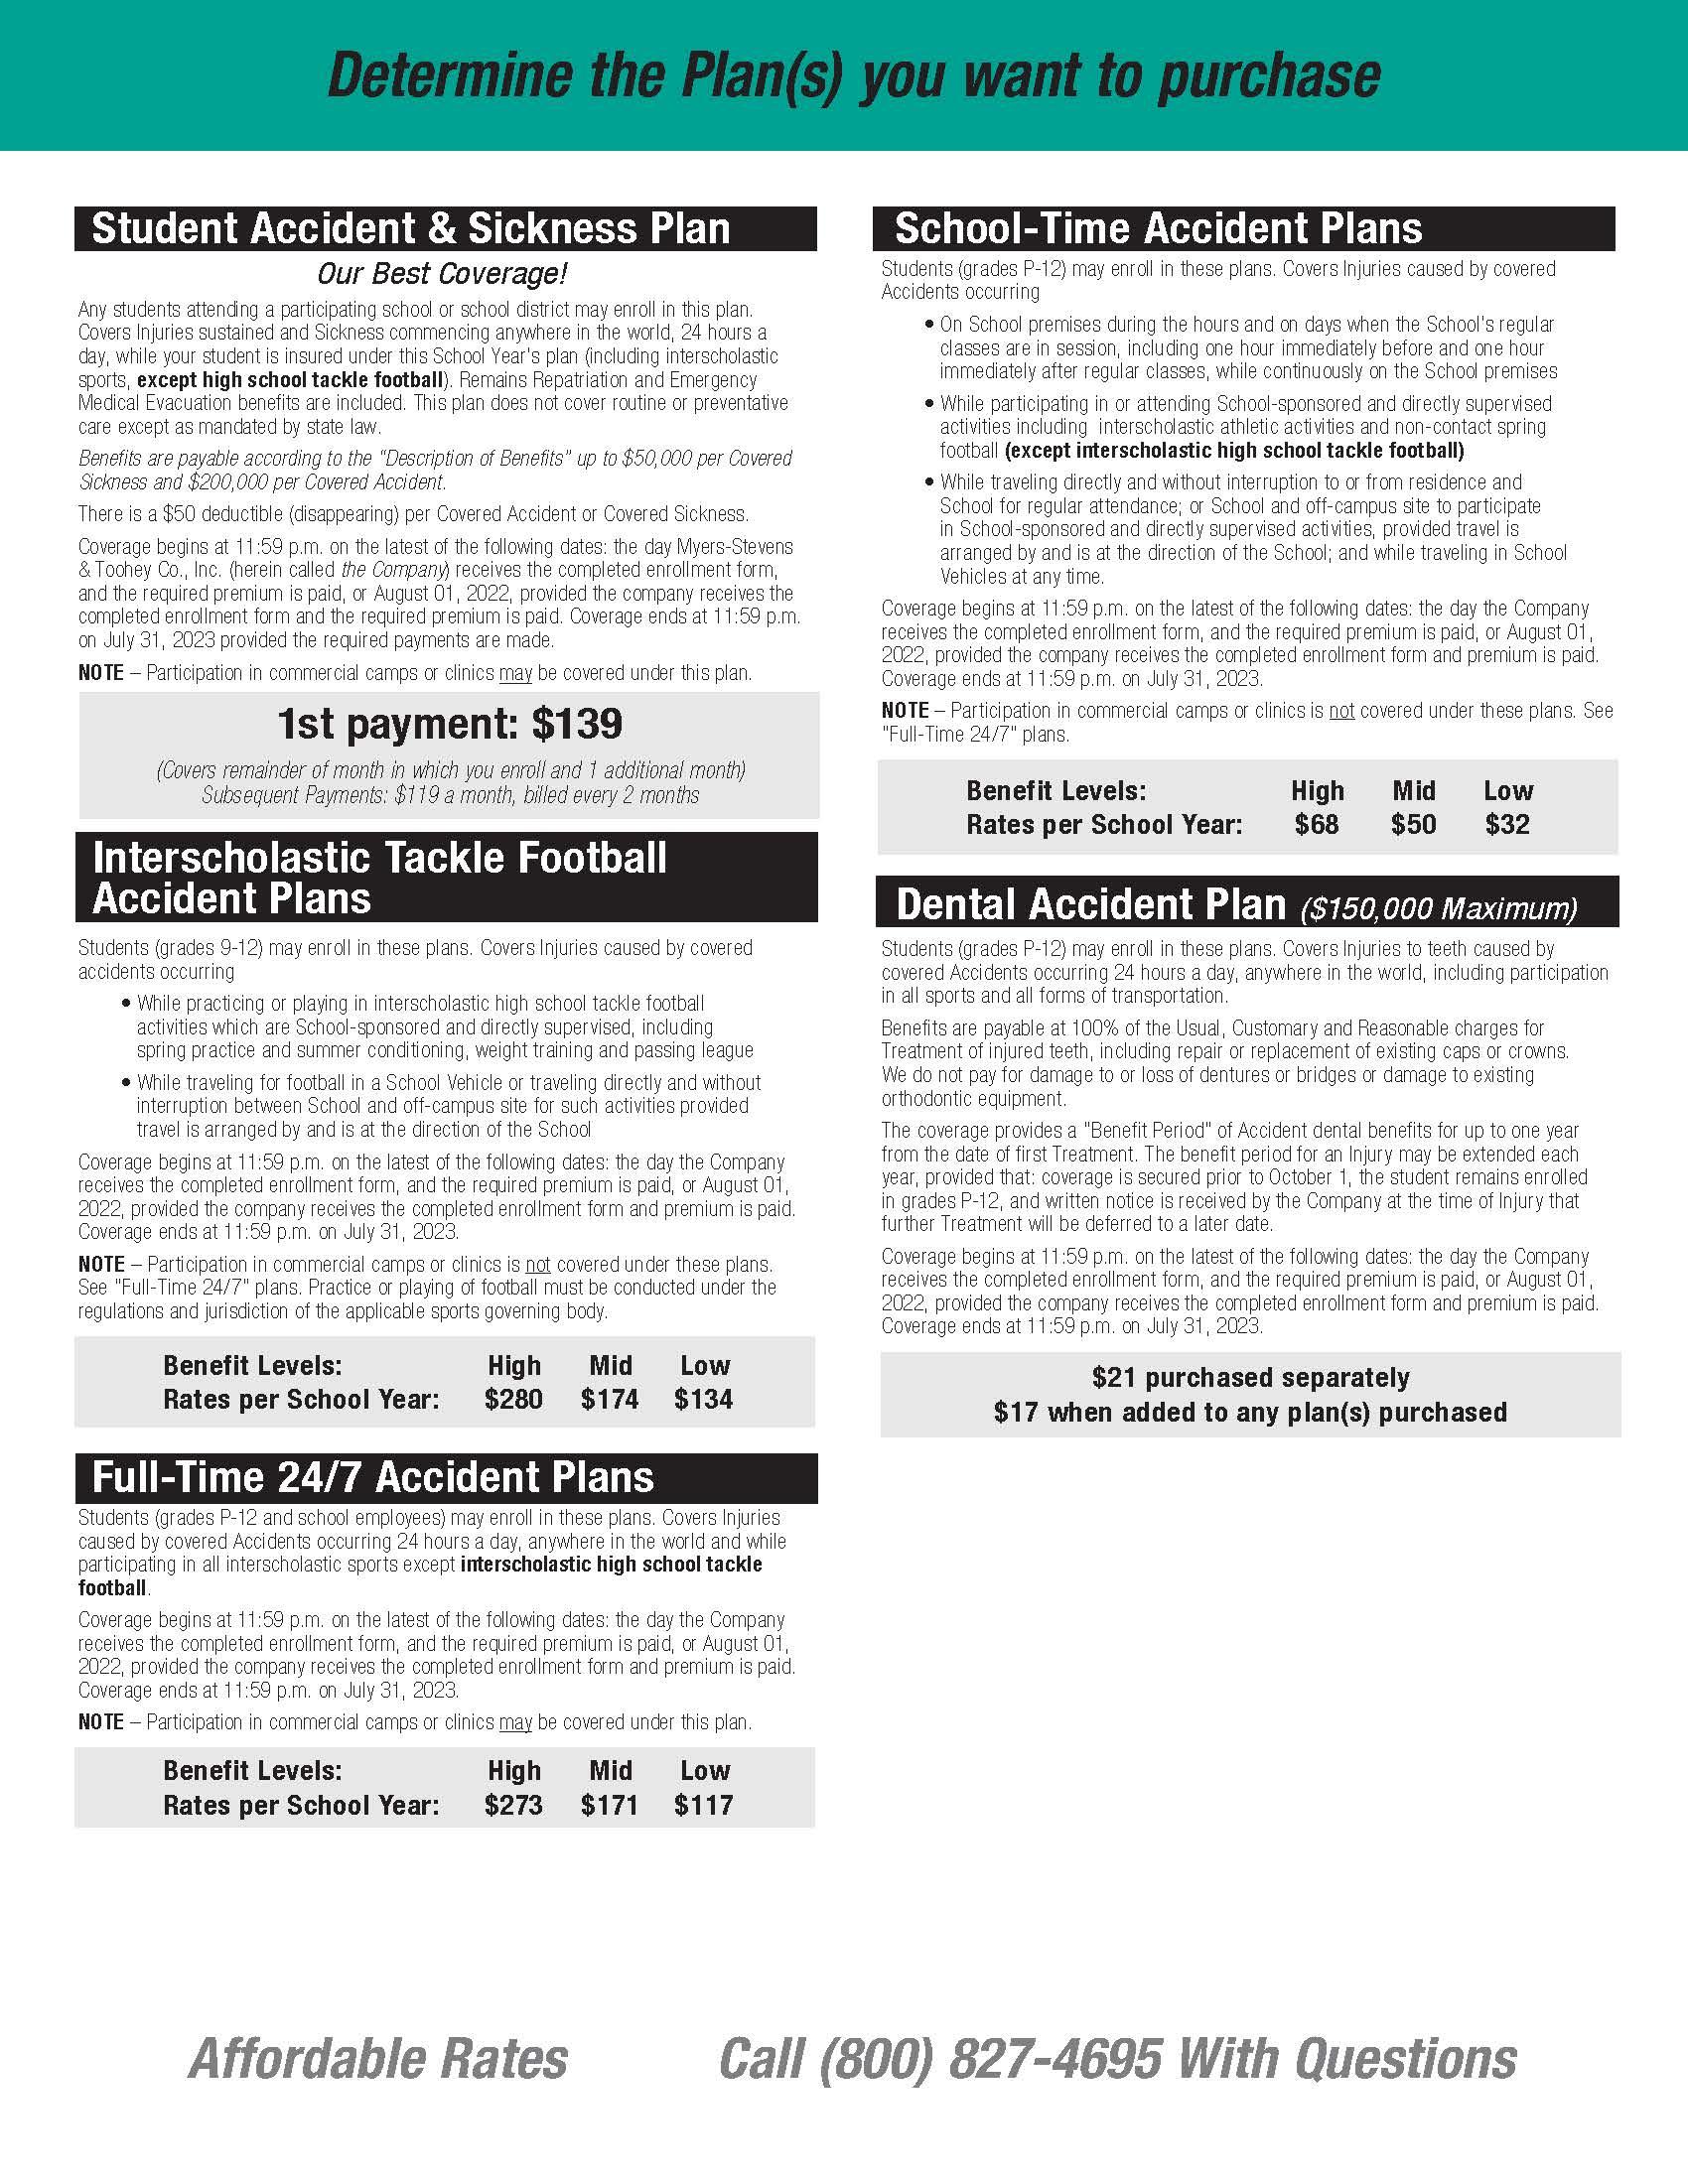 Supplemental Insurance page 2